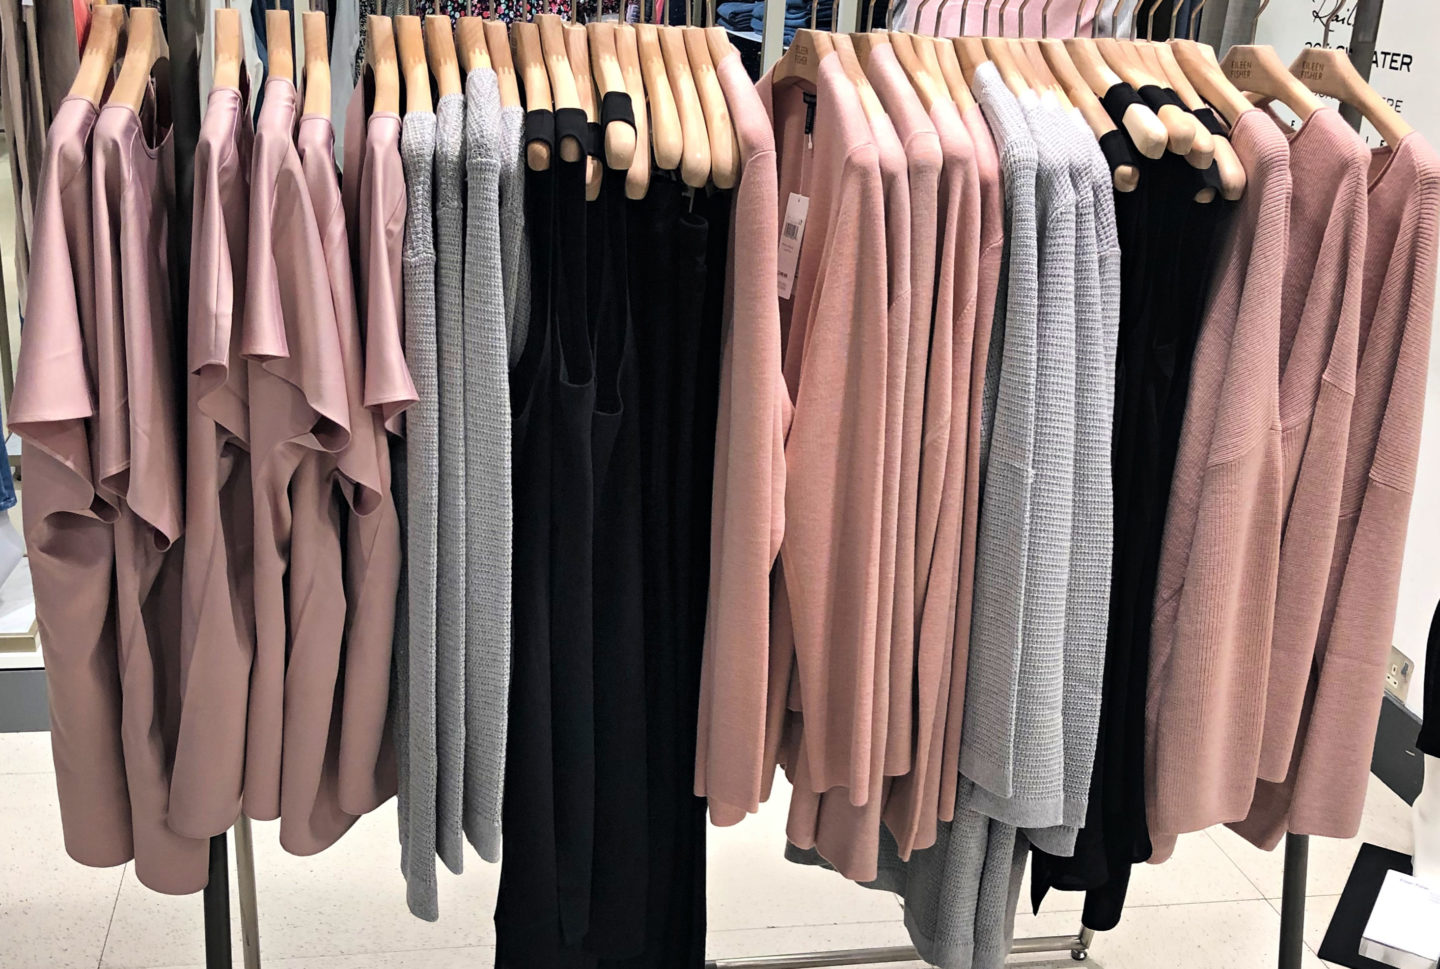 Soft pink and grey tops